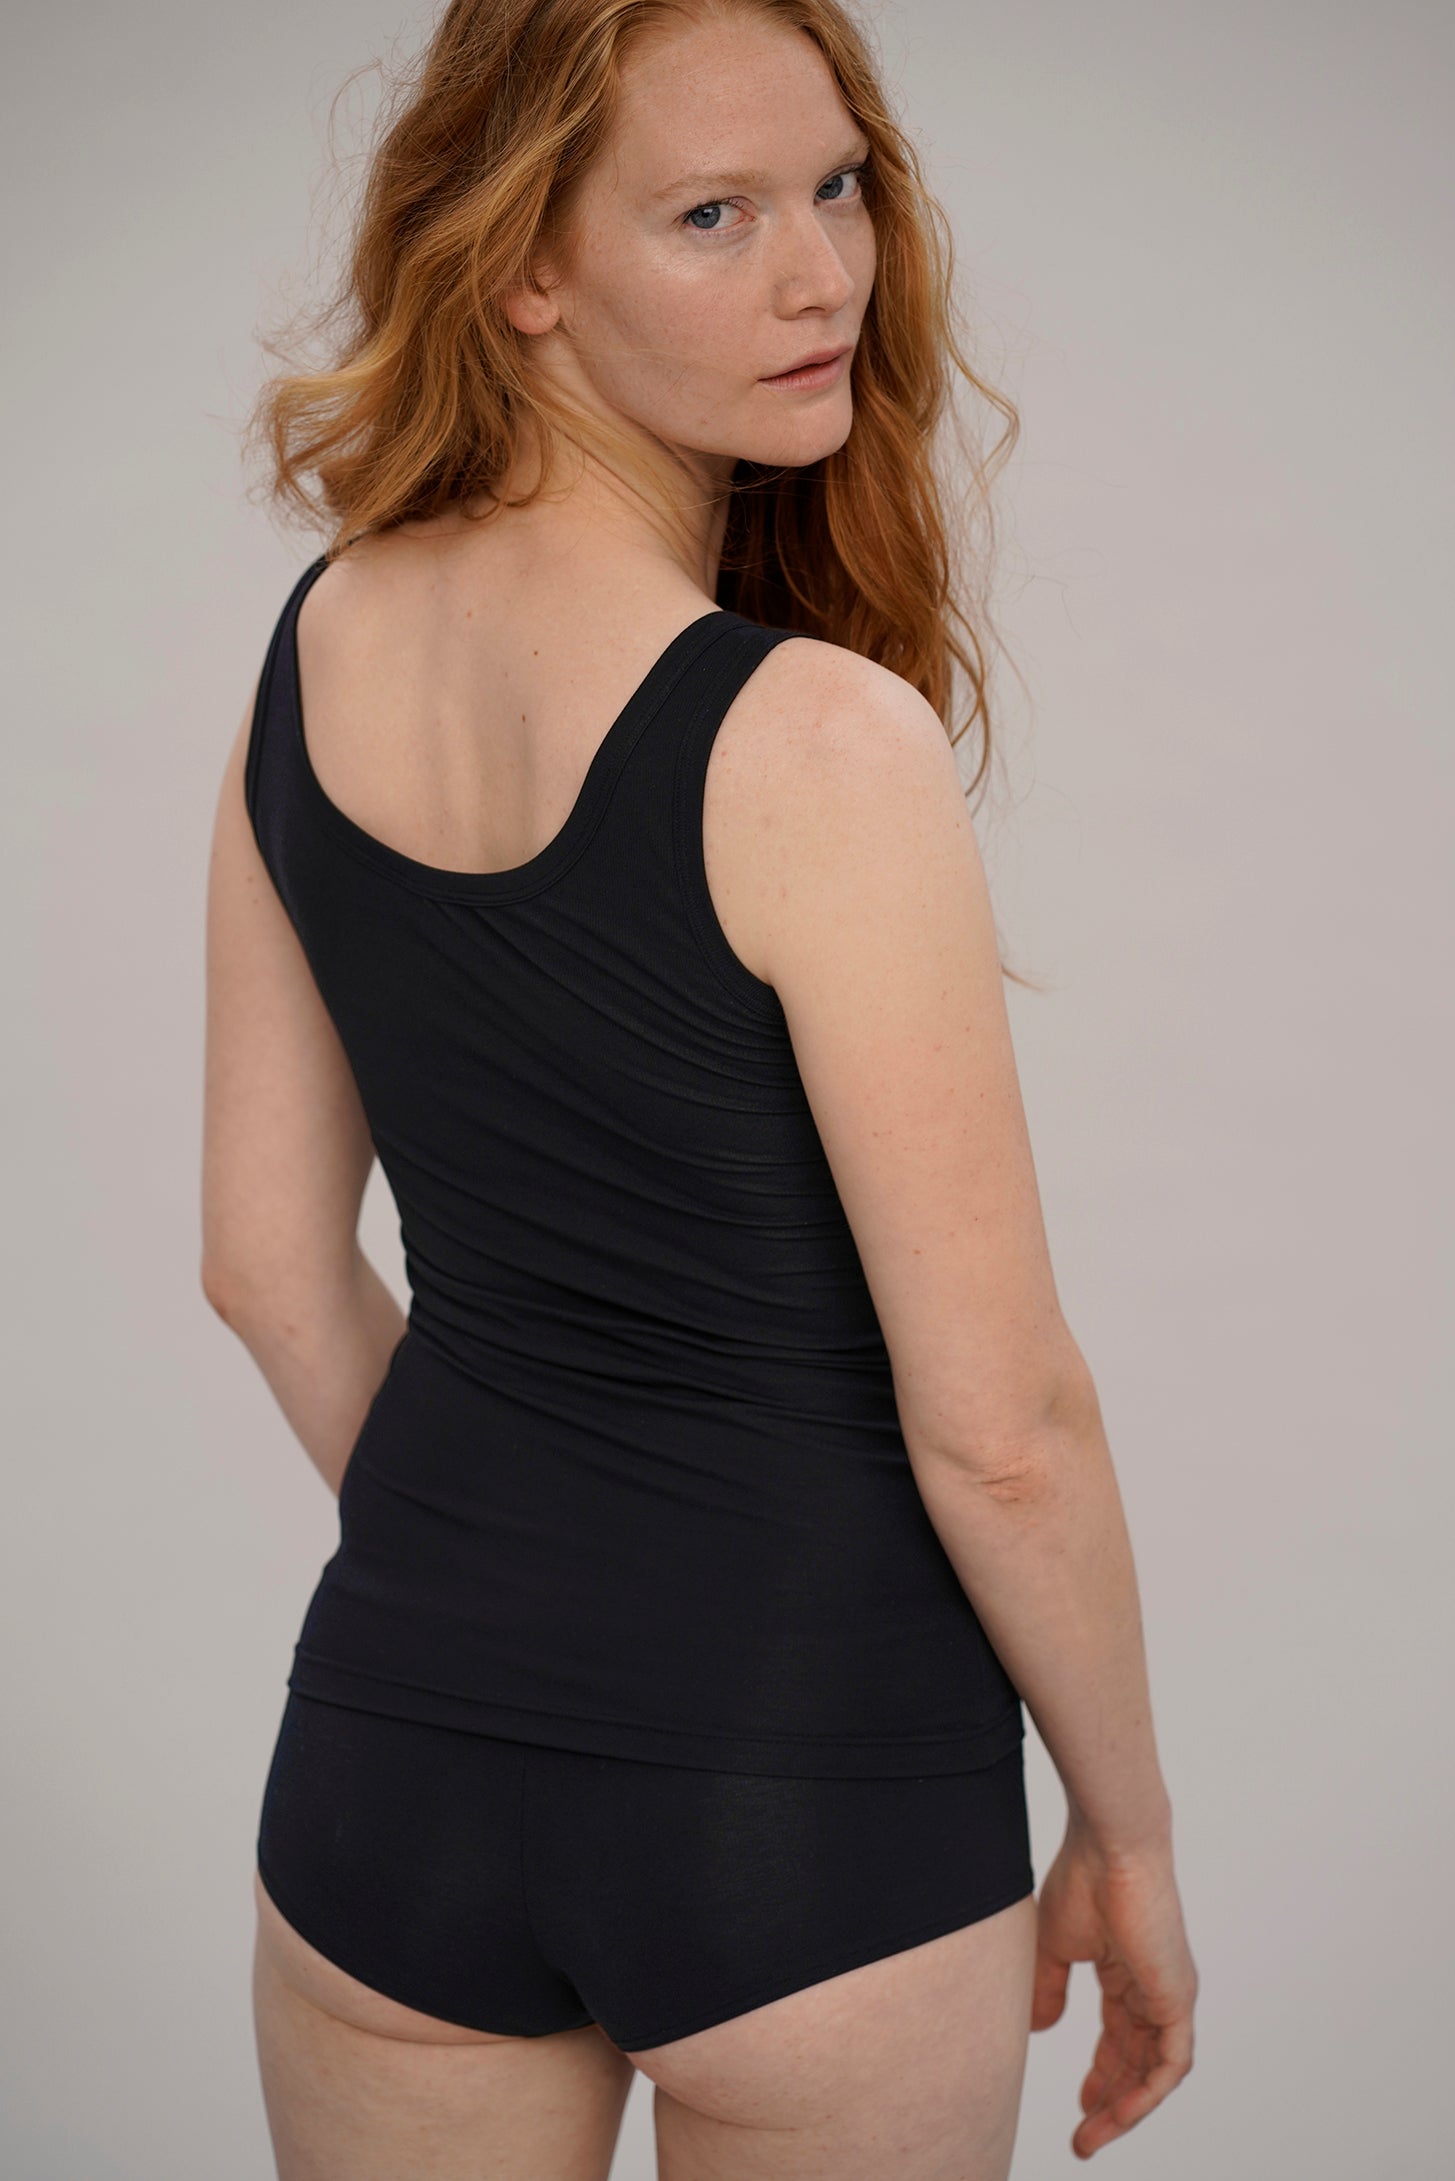 Tank top in black made from natural MicroModal from moi-basics